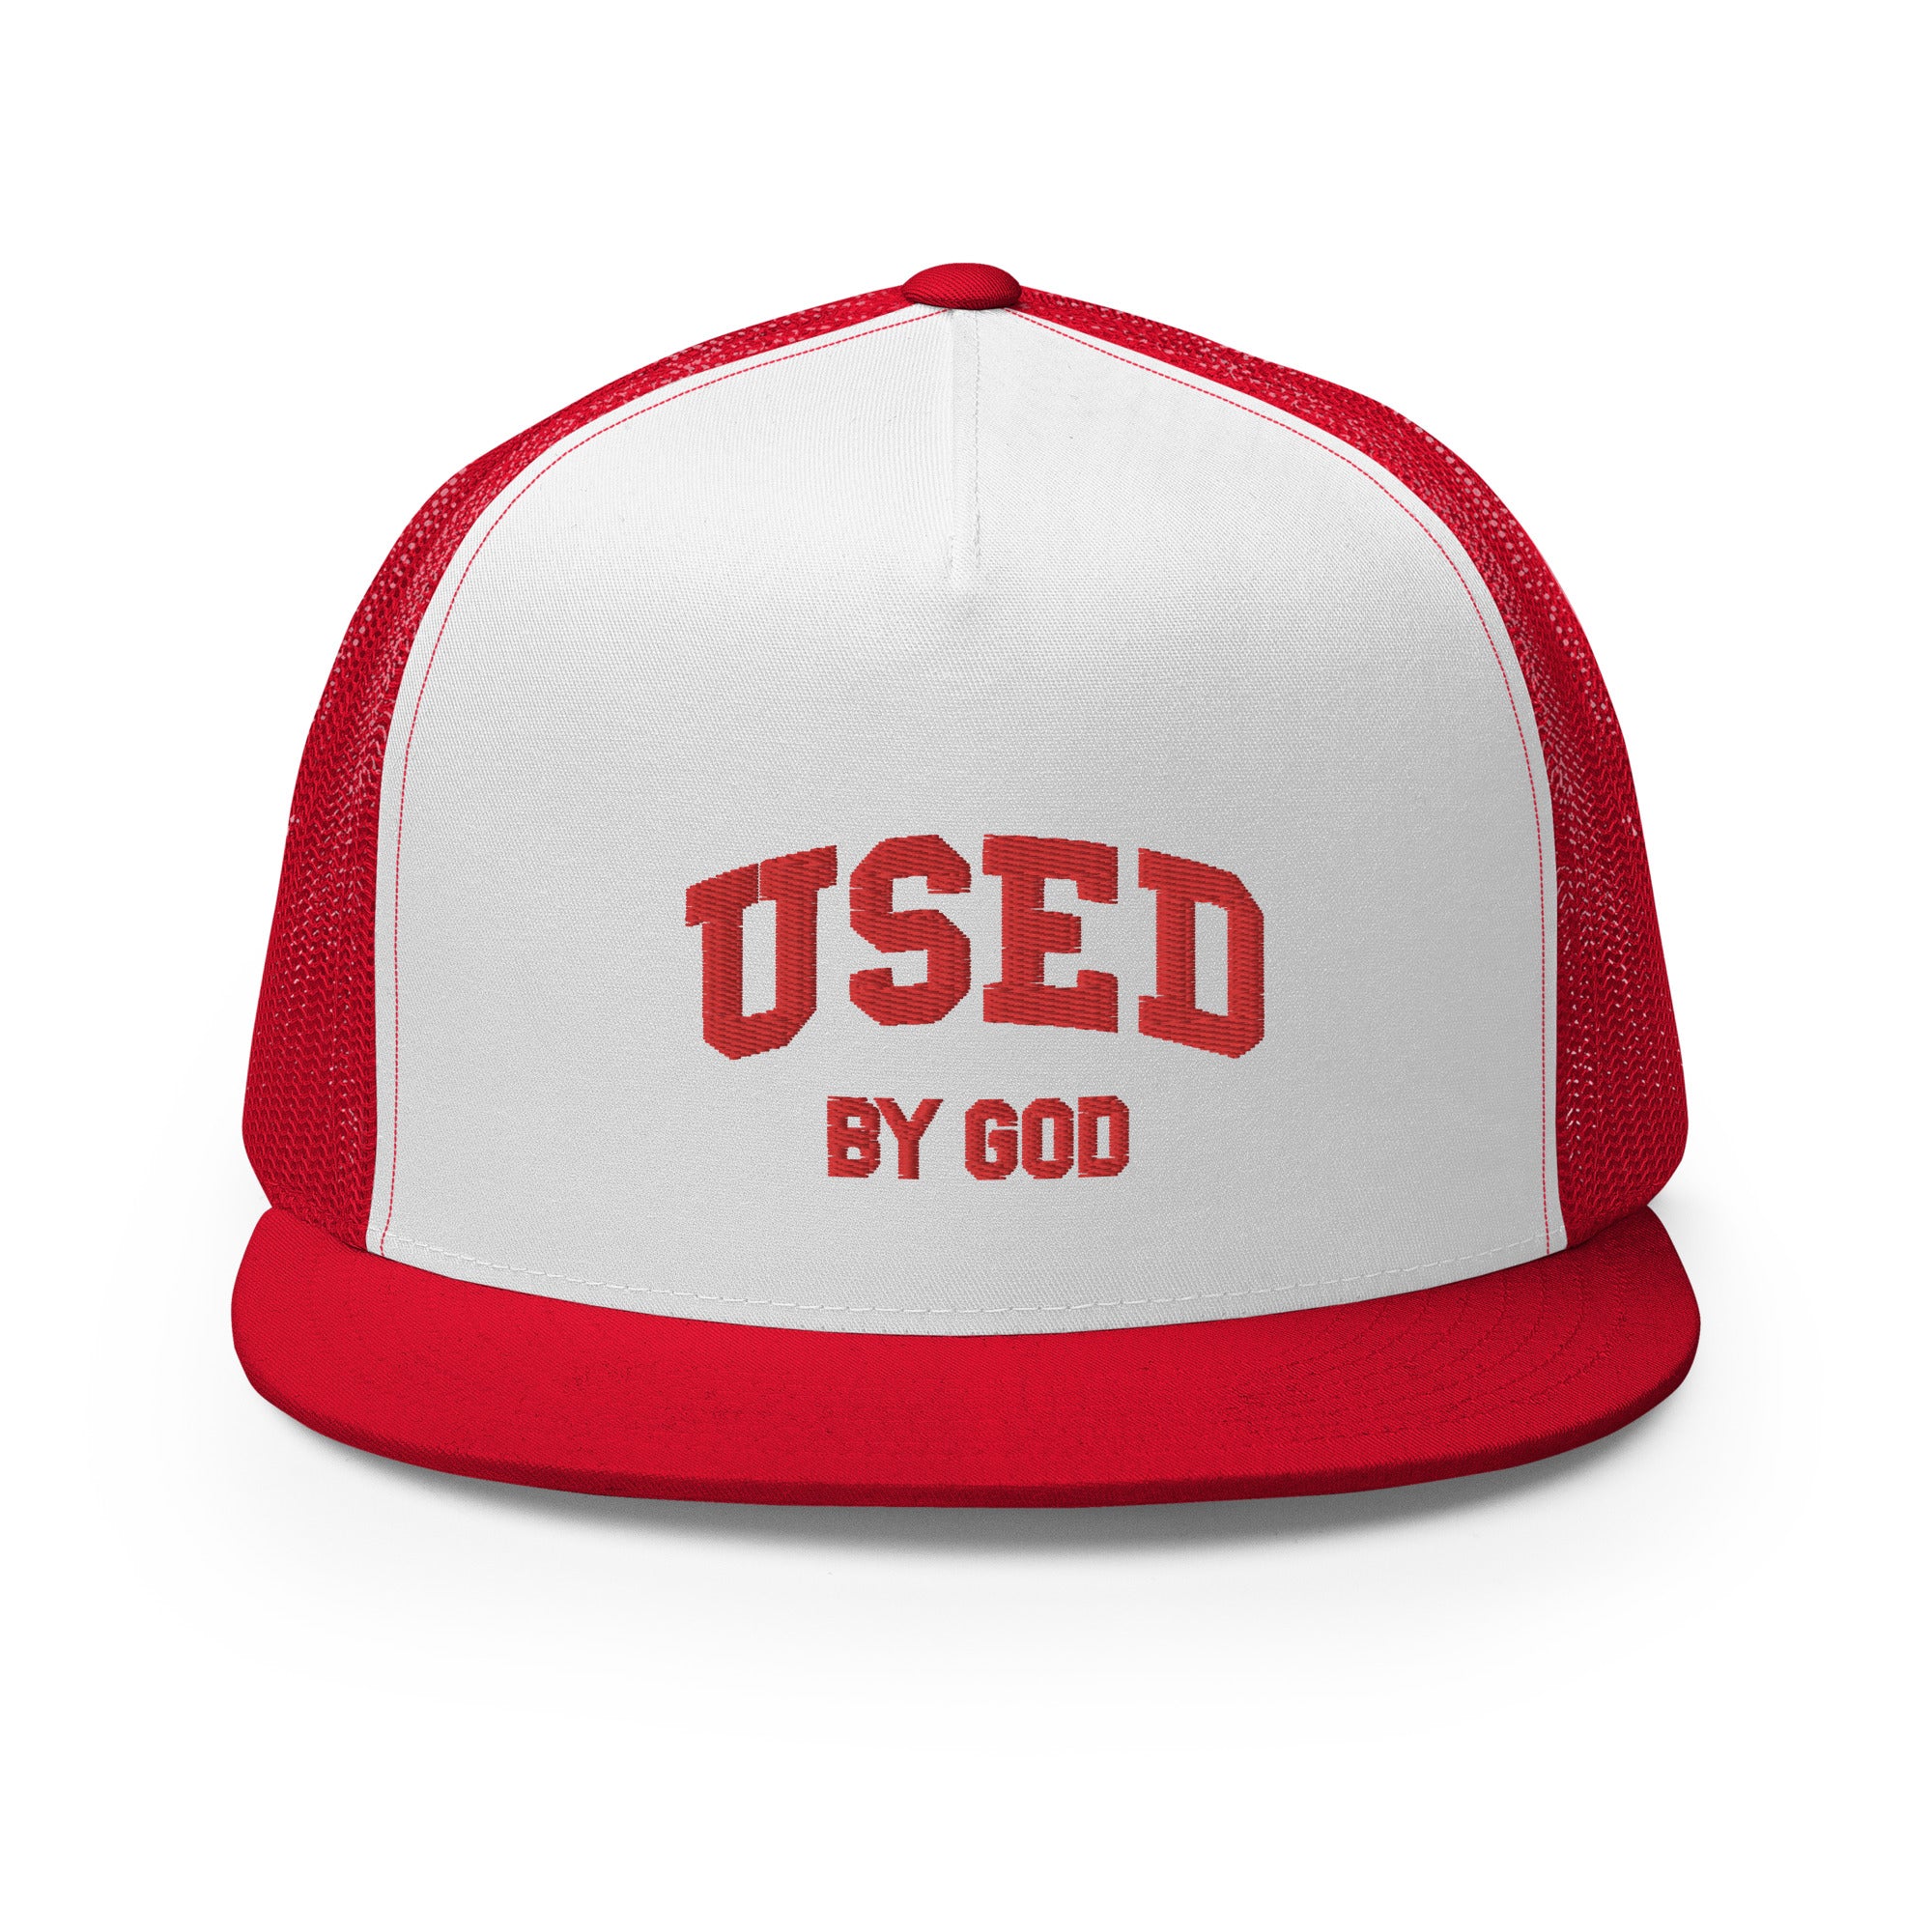 UBG Collegiate Trucker Cap, Used By God, Used By God Clothing, Christian Apparel, Christian Hats, Christian T-Shirts, Christian Clothing, God Shirts, Christian Sweatshirts, God Clothing, Jesus Hoodie, Jesus Clothes, God Is Dope, Art Of Homage, Red Letter Clothing, Elevated Faith, Active Faith Sports, Beacon Threads, God The Father Apparel